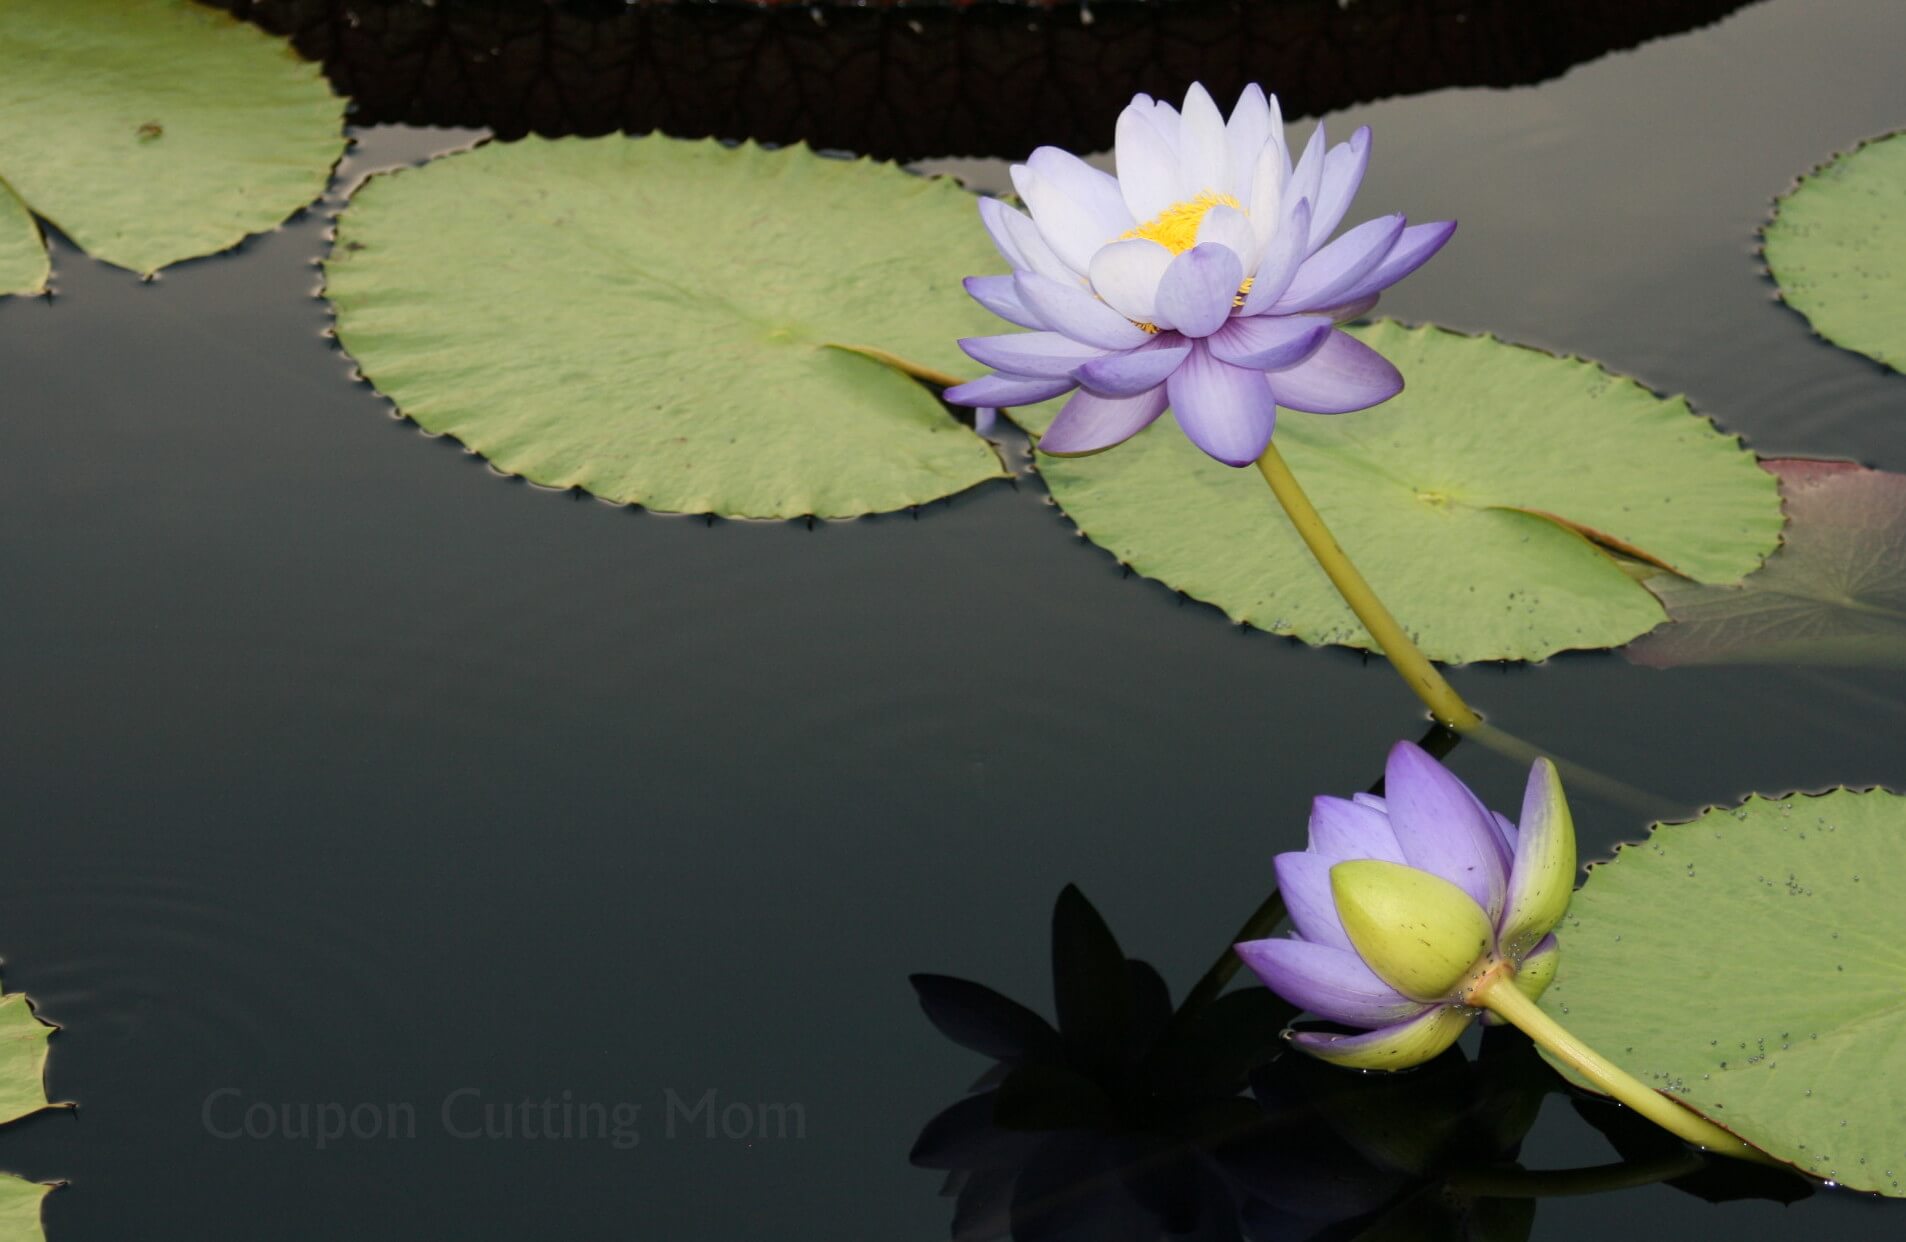 Wordless Wednesday Longwood Gardens Water Lilies Coupon Cutting Mom